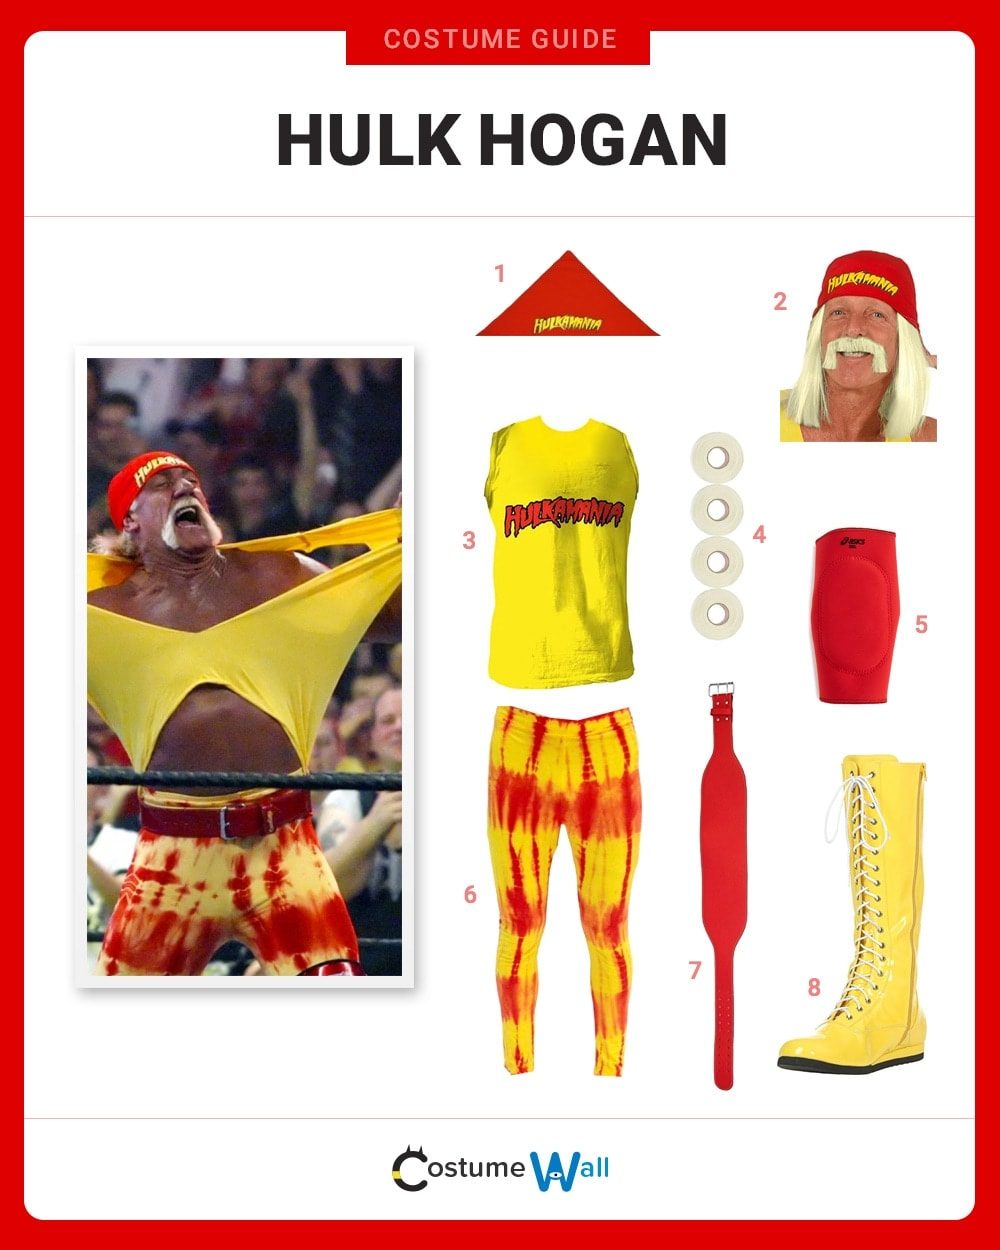 The Ultimate Guide to Creating a Hulk Hogan Costume